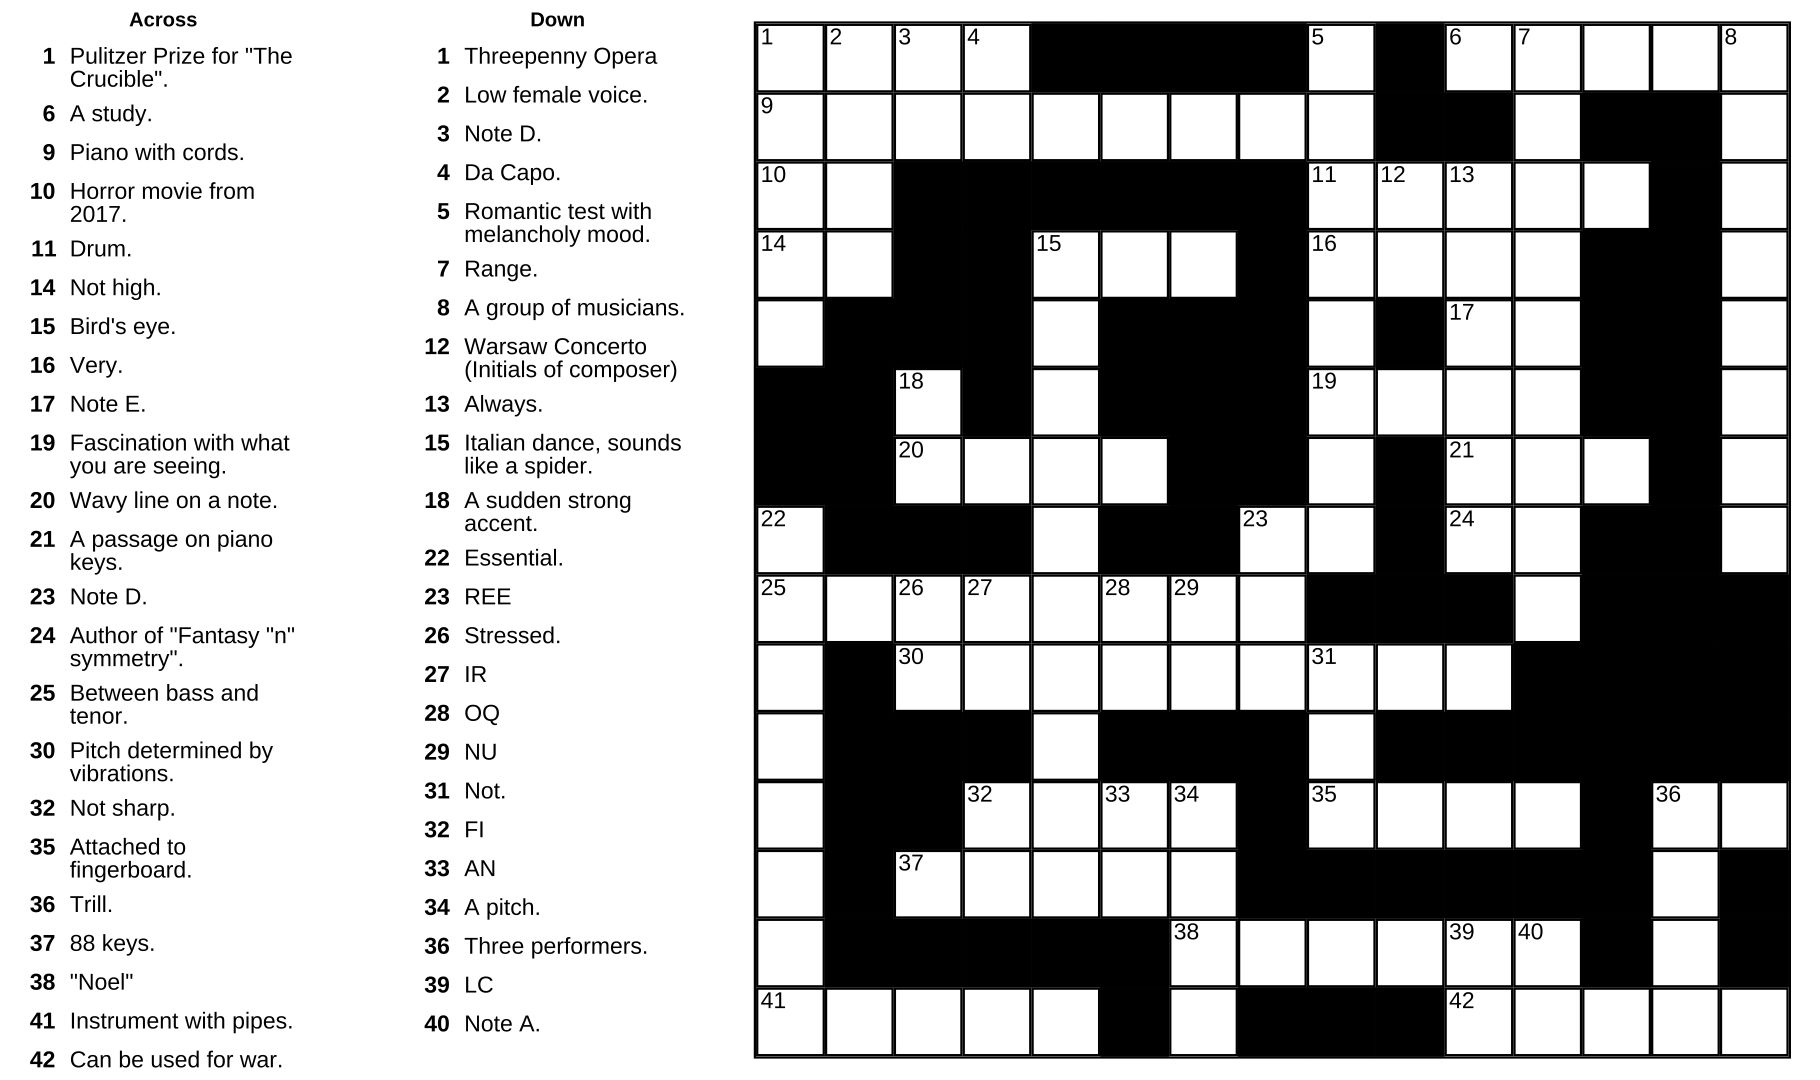 Crossword Puzzles About Movies Printable_42693